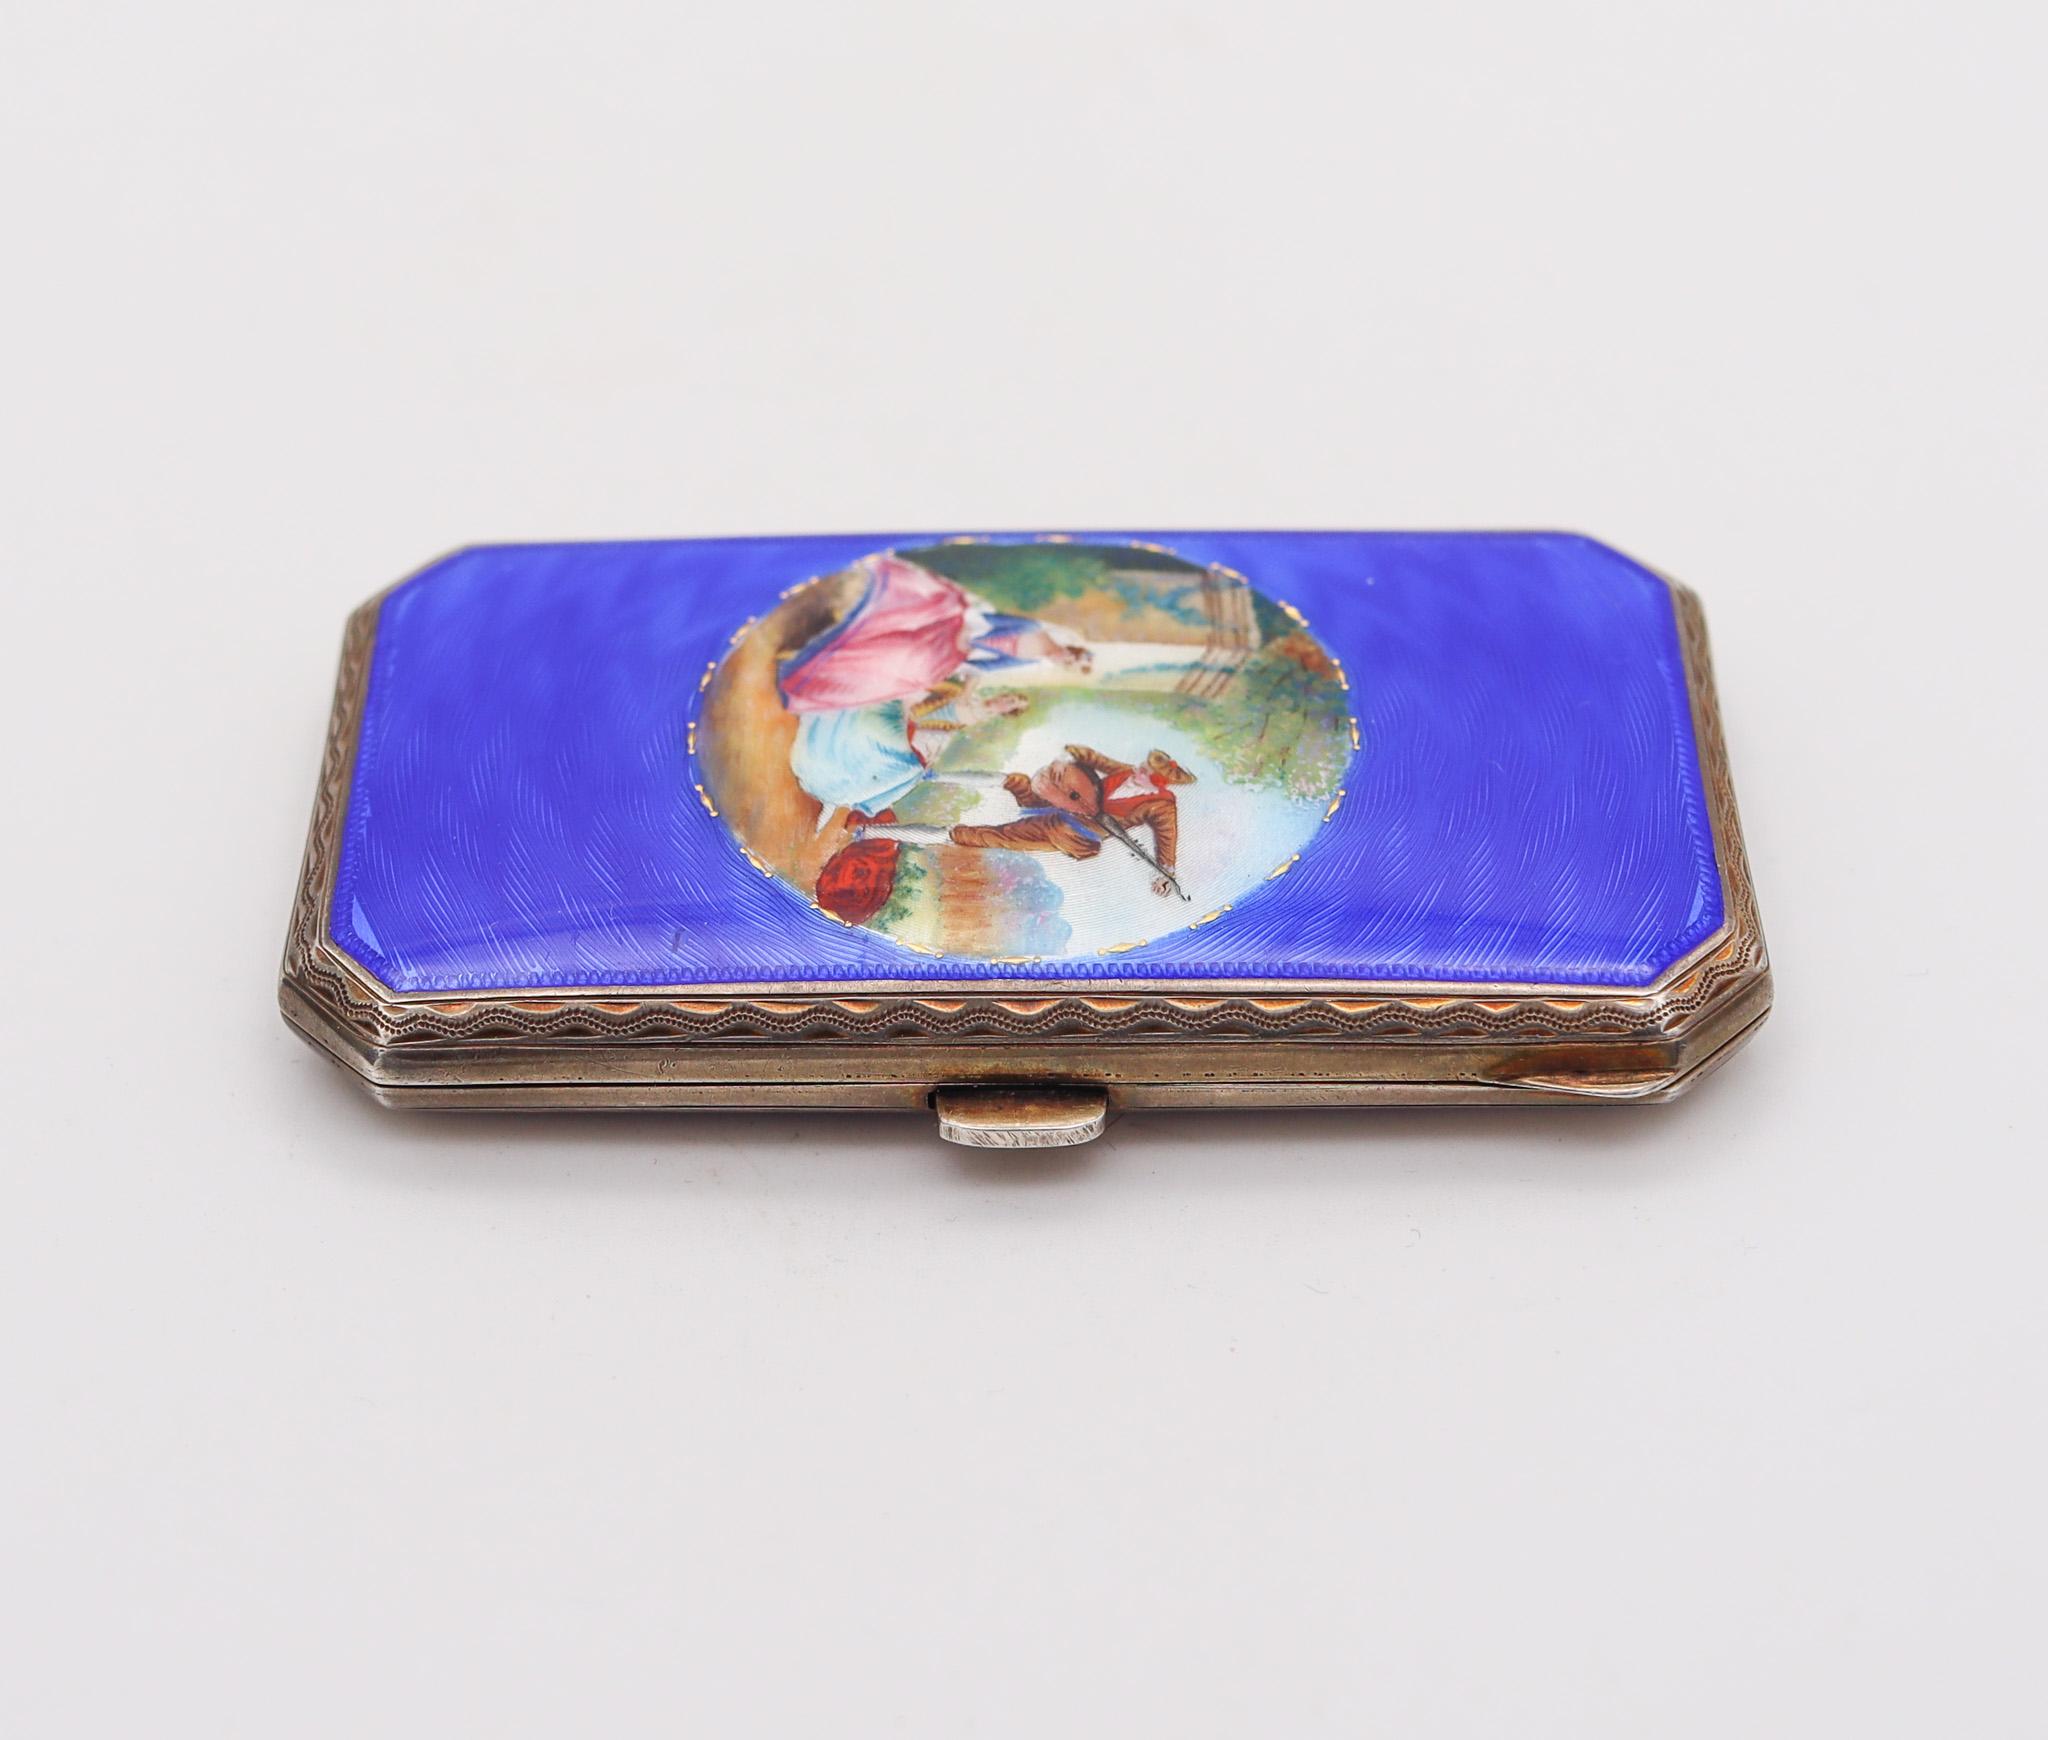 Polished German Pforzheim 1915 Art Deco Guilloché Enameled Box In .935 Sterling Silver For Sale